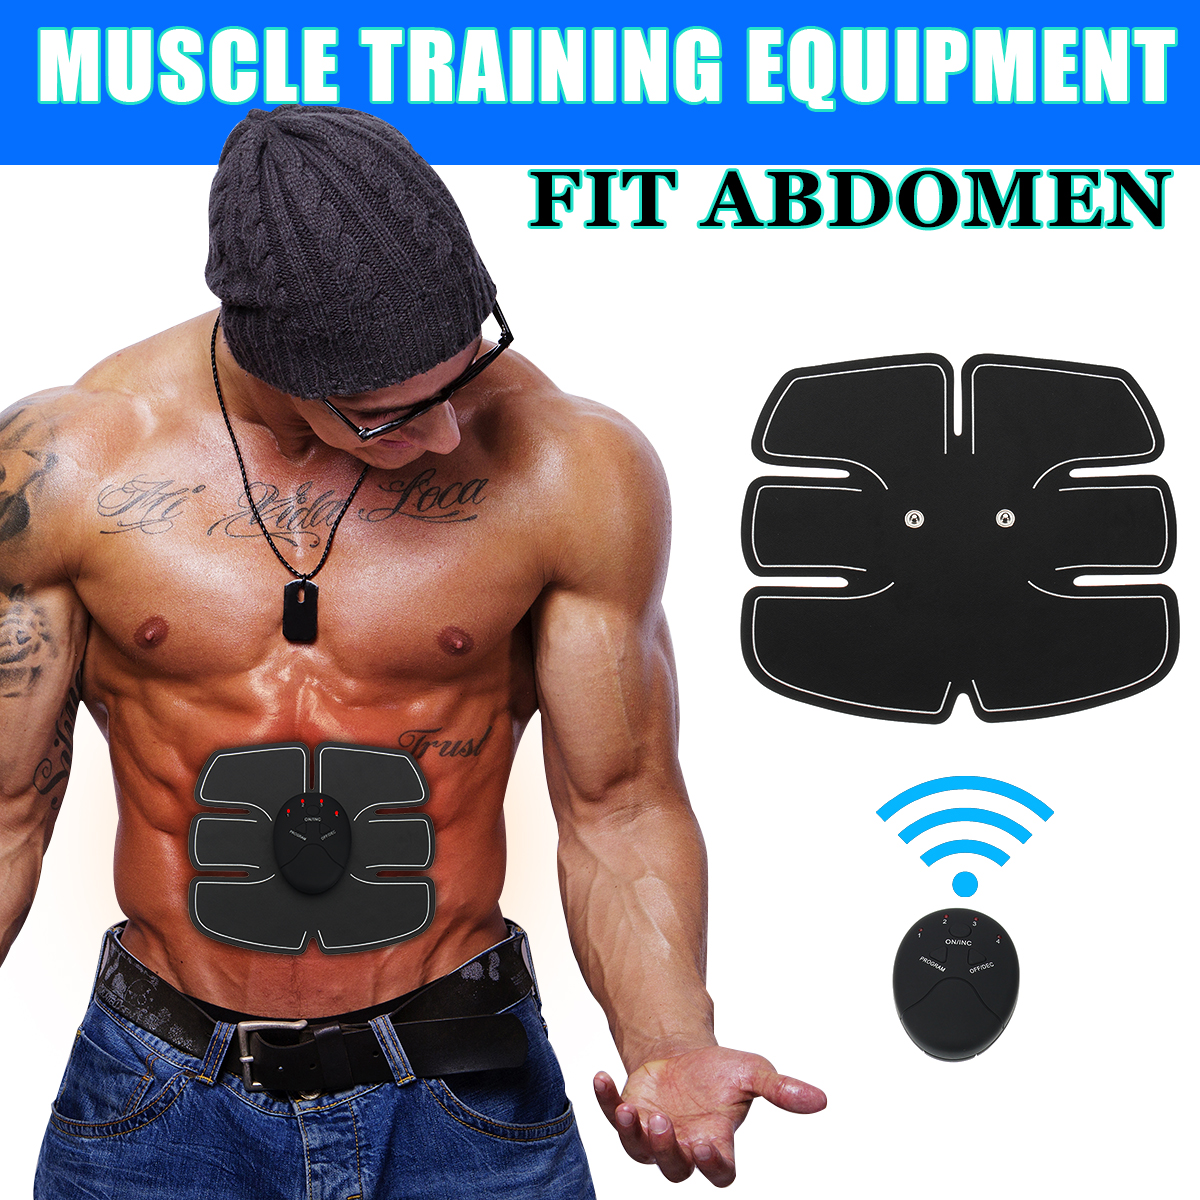 Abdomen-Muscle-Stimulator-EMS-Training-Electrical-Body-Shape-Home-Trainer-Abs-Squishies-Squishy-Stic-1192776